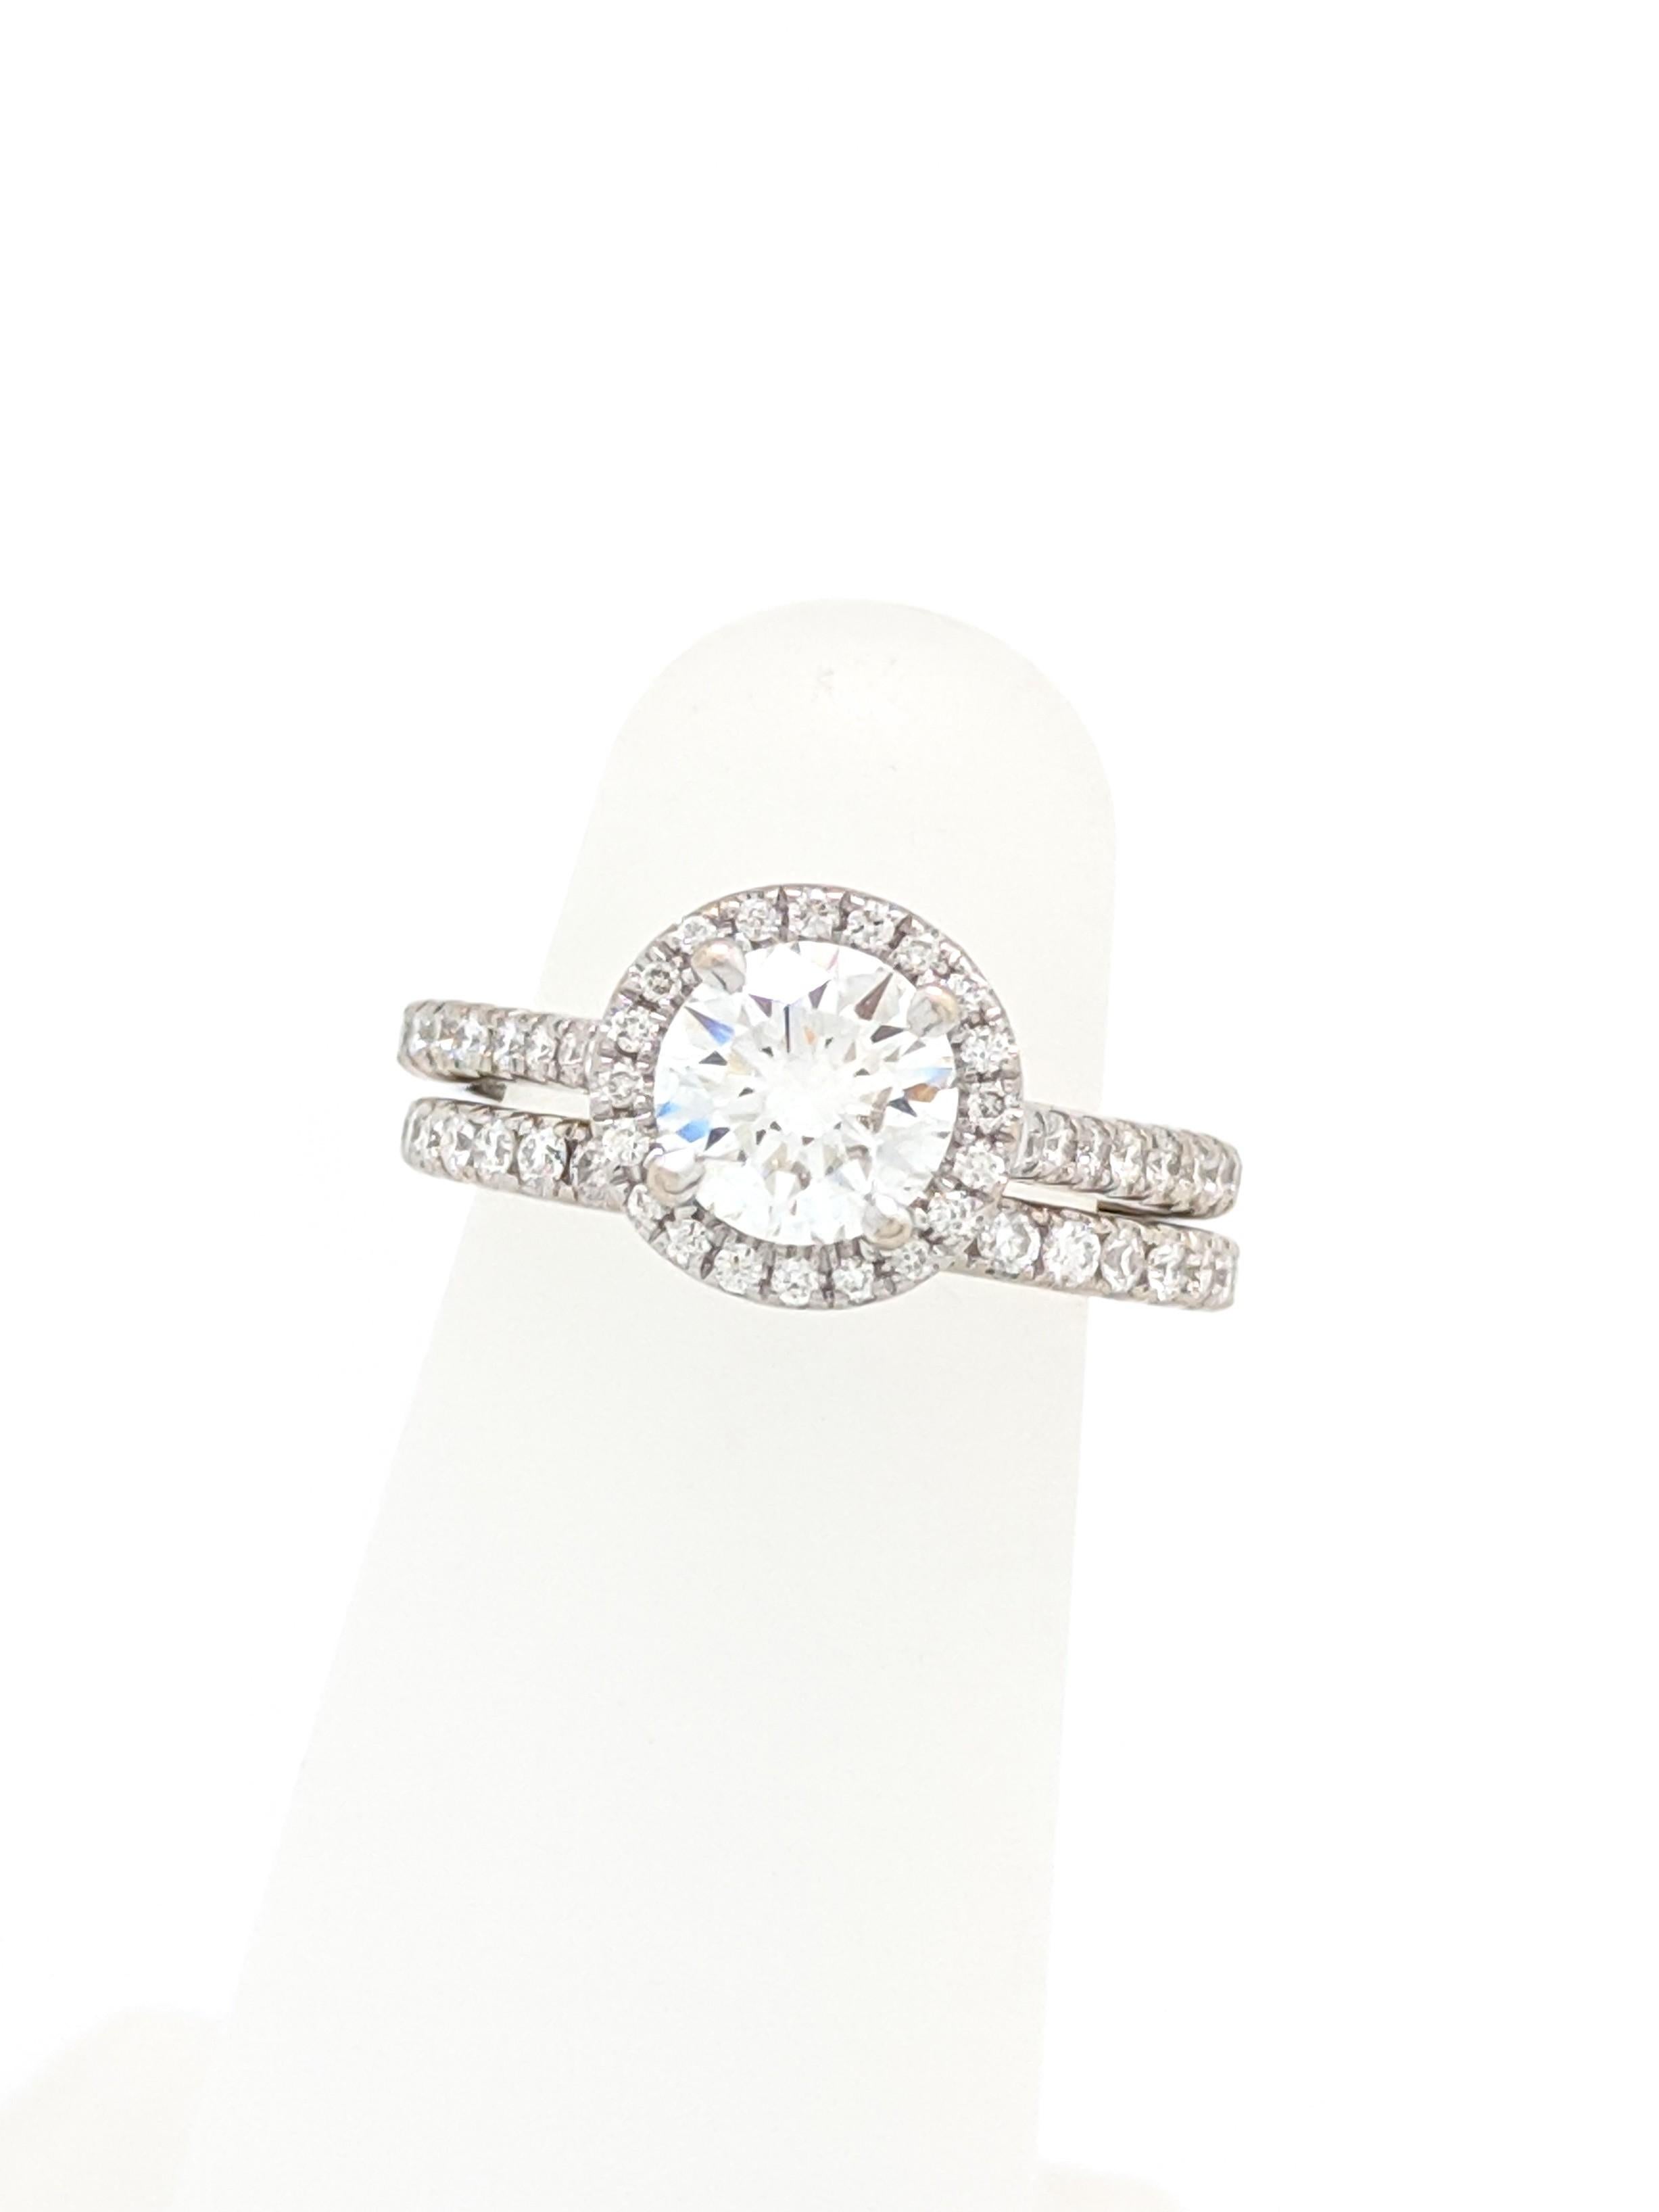 .96ct. Round Brilliant Cut Natural Diamond Engagement Ring GIA Certified SI1/F

You are viewing a Stunning .96ct. natural round brilliant cut diamond. This diamond is certified by GIA (Gemological Institute of America) and has been graded as SI1 in